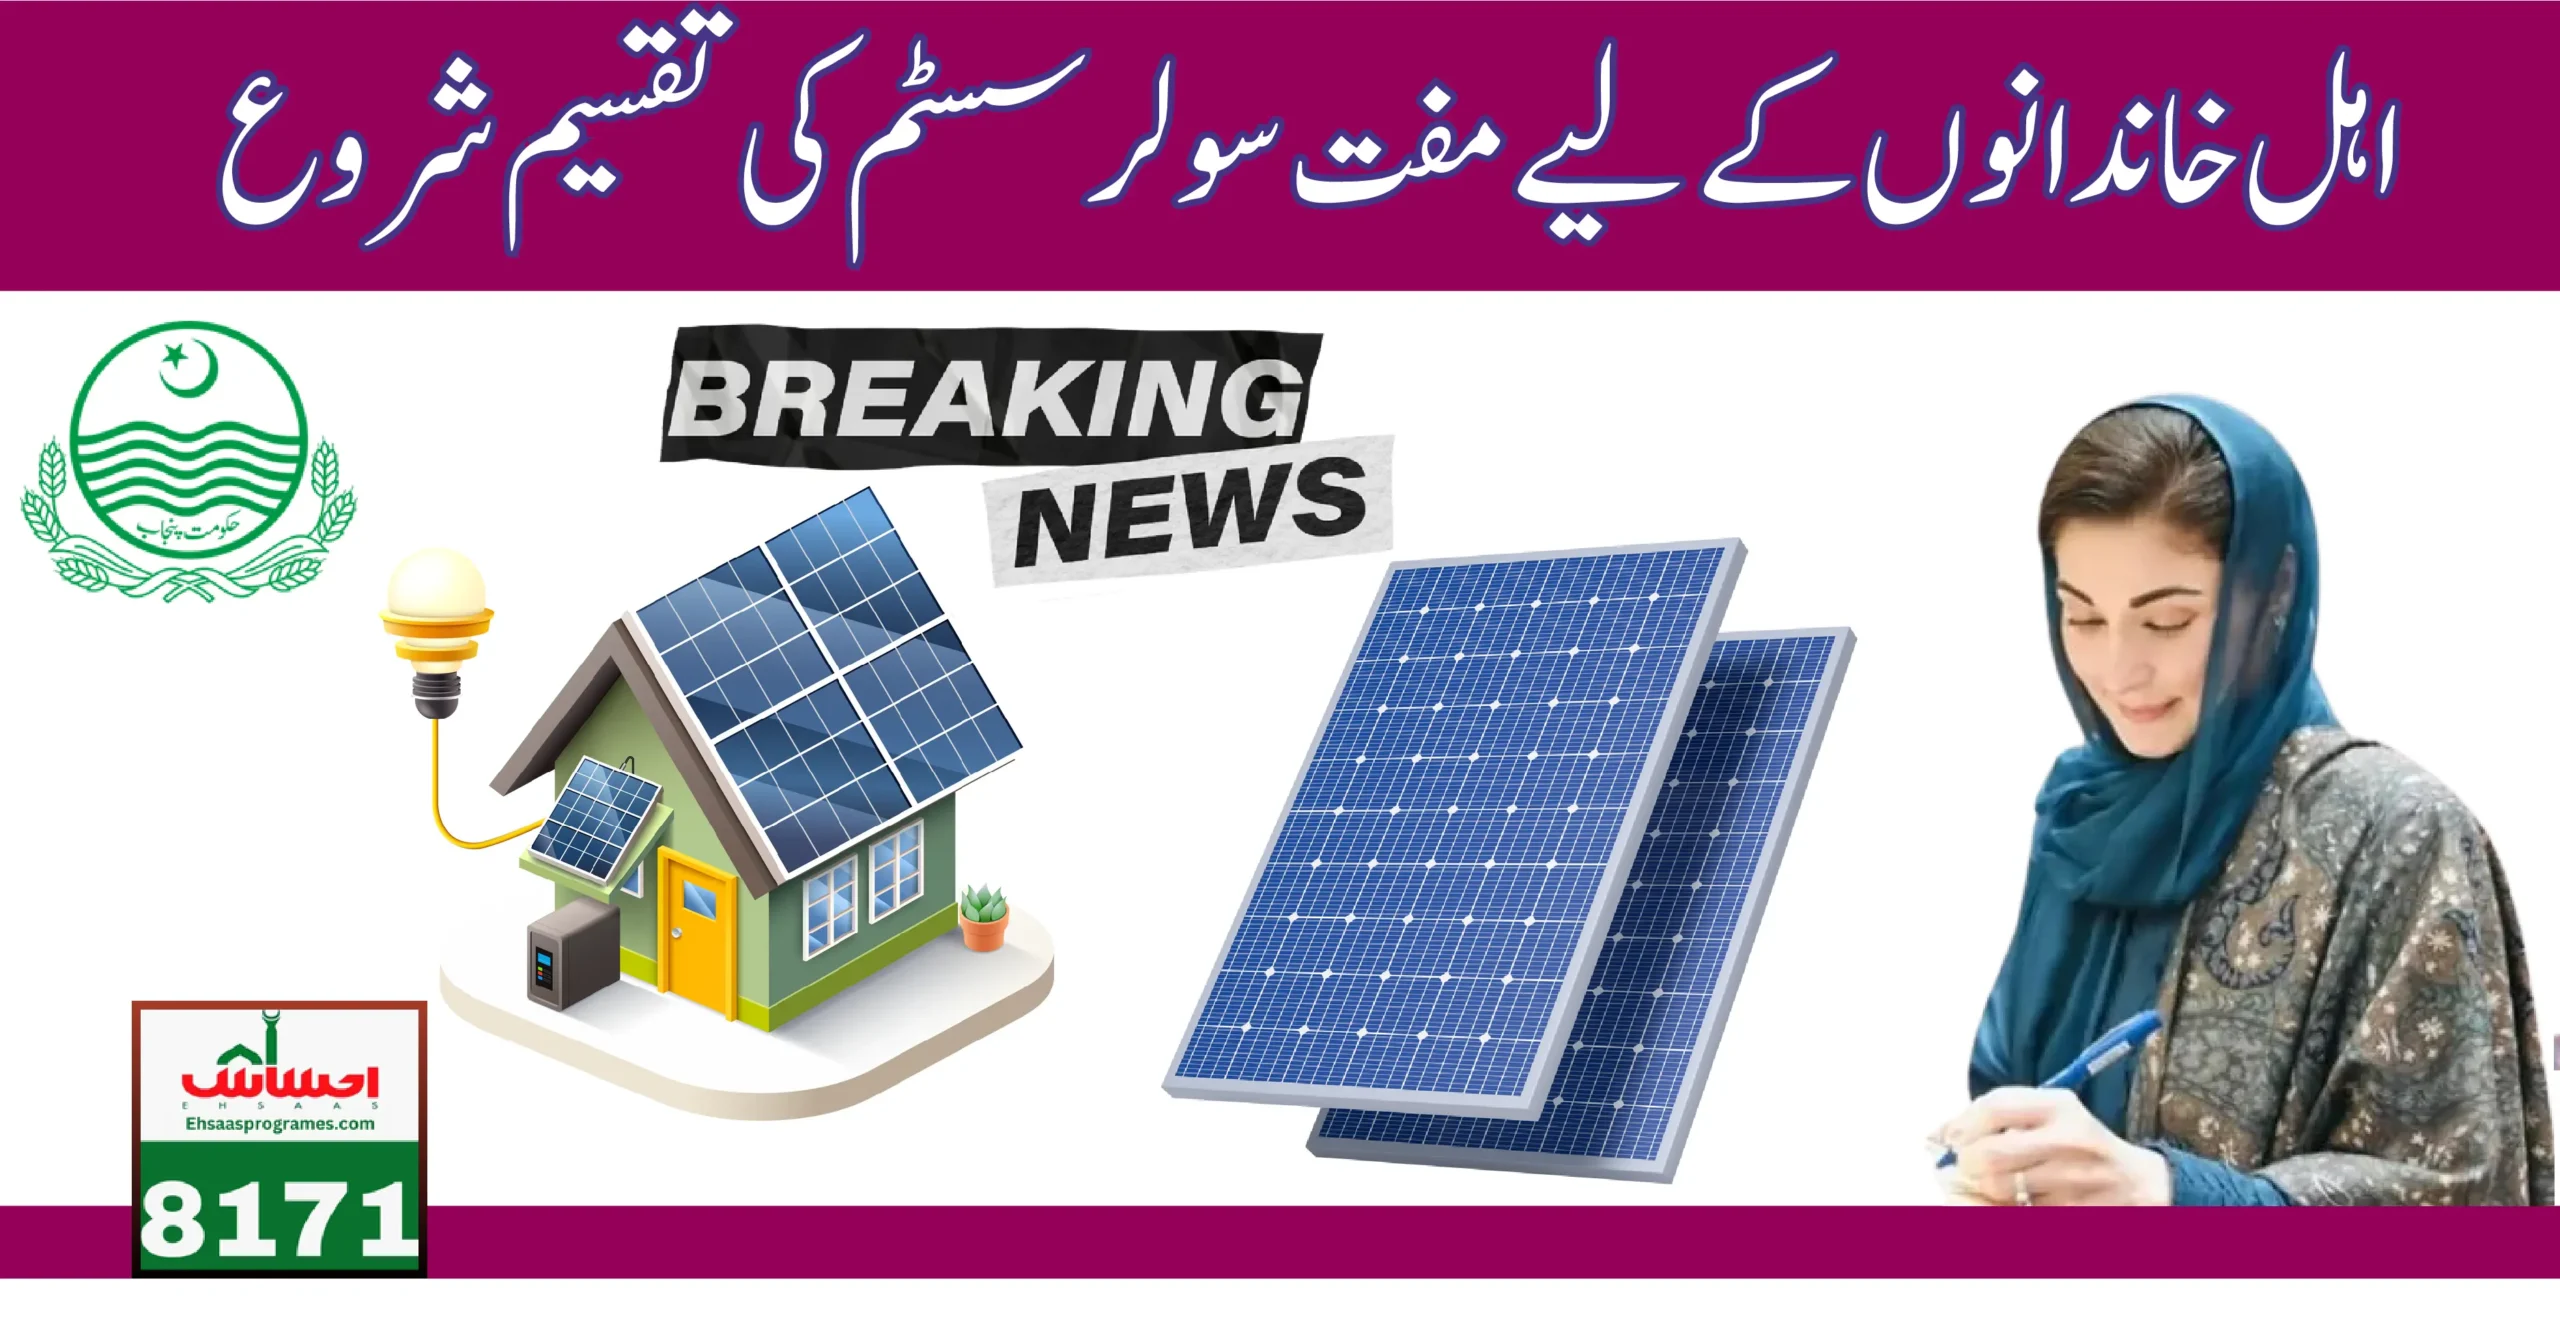 CM Free Solar Panel Scheme For Punjab Residents At 0% Intrest Rate For 2 Years